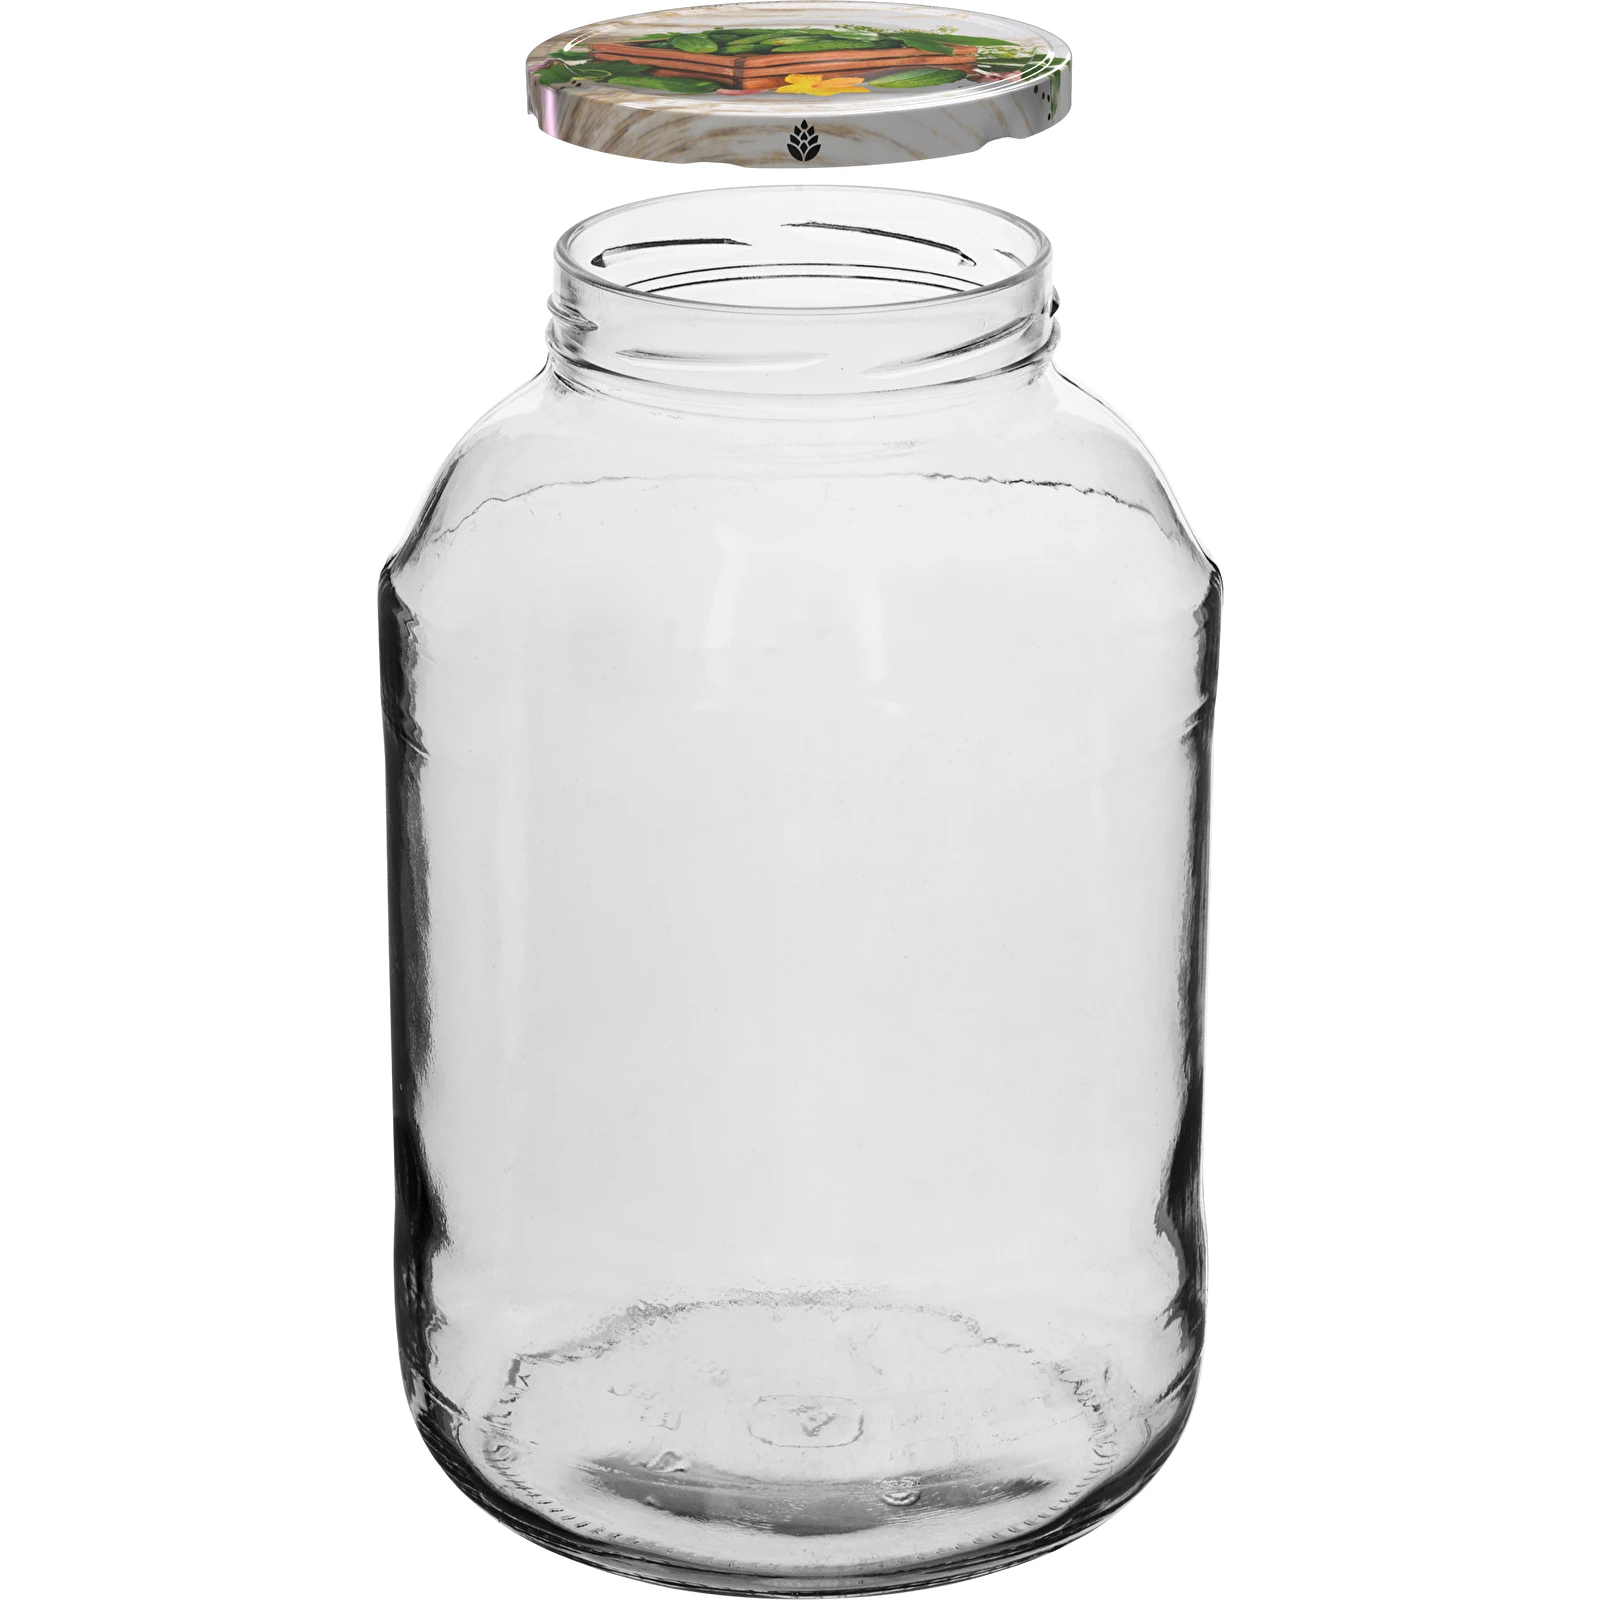 https://browin.com/static/images/1600/4l-twist-off-glass-jar-with-coloured-lid-o100-and-fork-or-tongs-133404_to3.webp